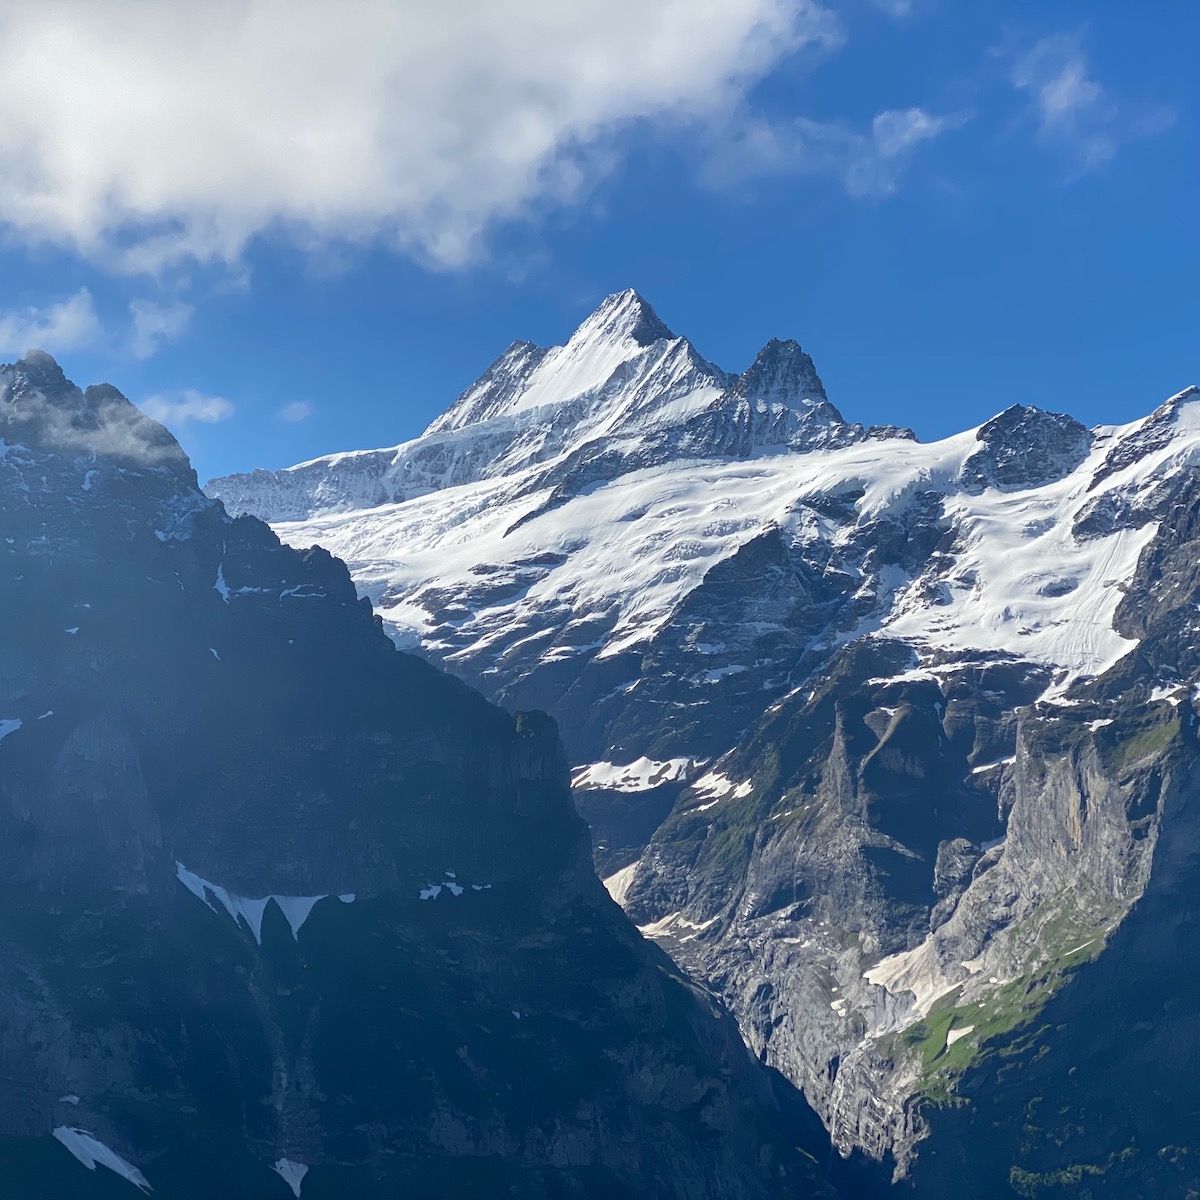 7 Things I Wish I Knew Before Visiting The Swiss Alps